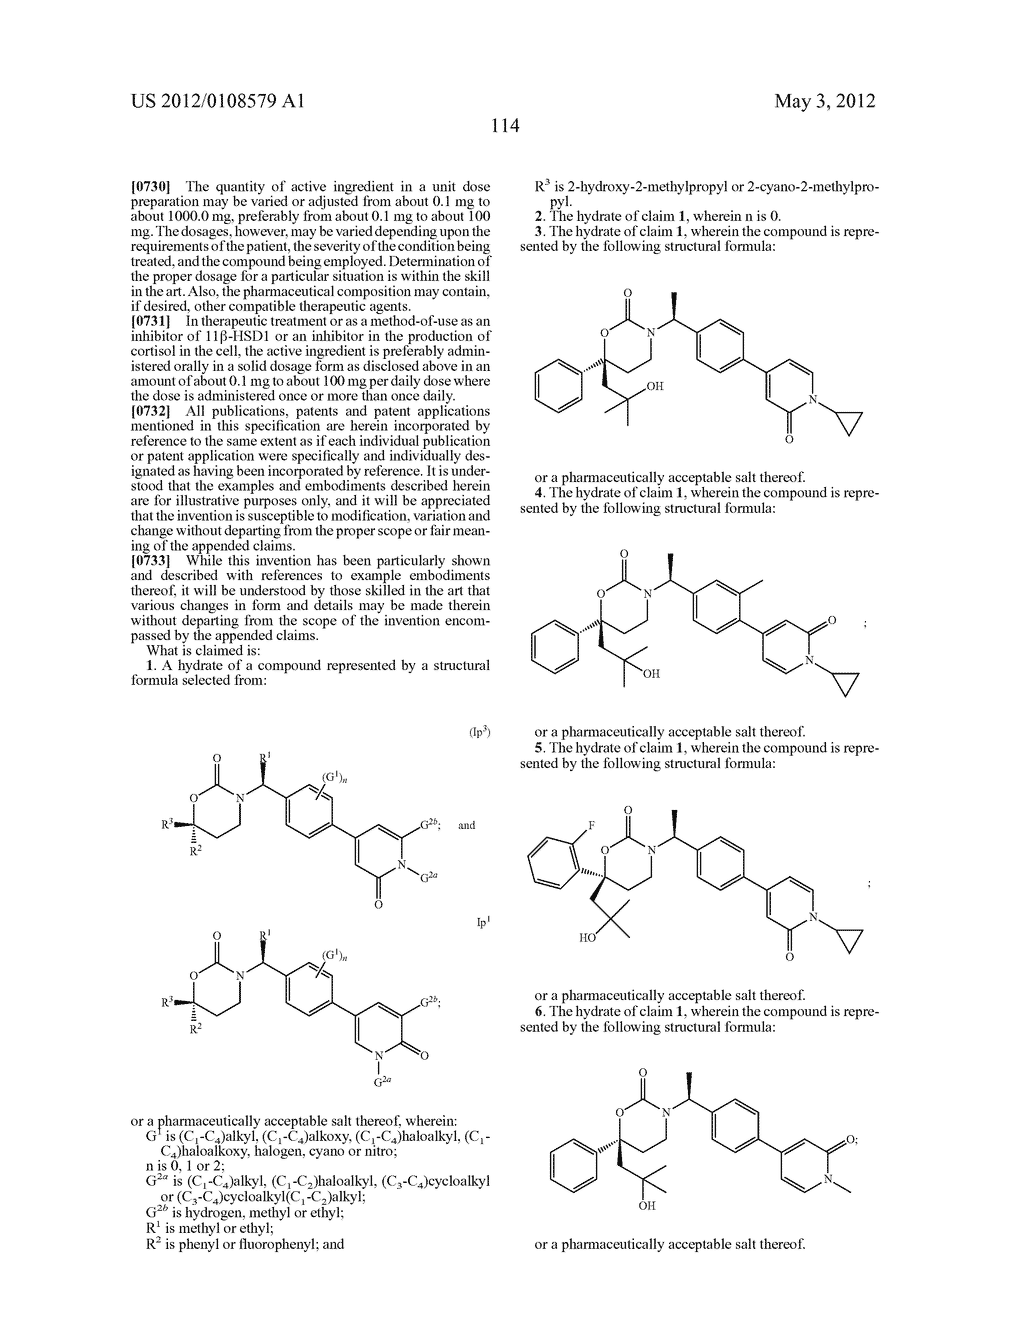 CYCLIC INHIBITORS OF 11BETA-HYDROXYSTEROID DEHYDROGENASE 1 - diagram, schematic, and image 117